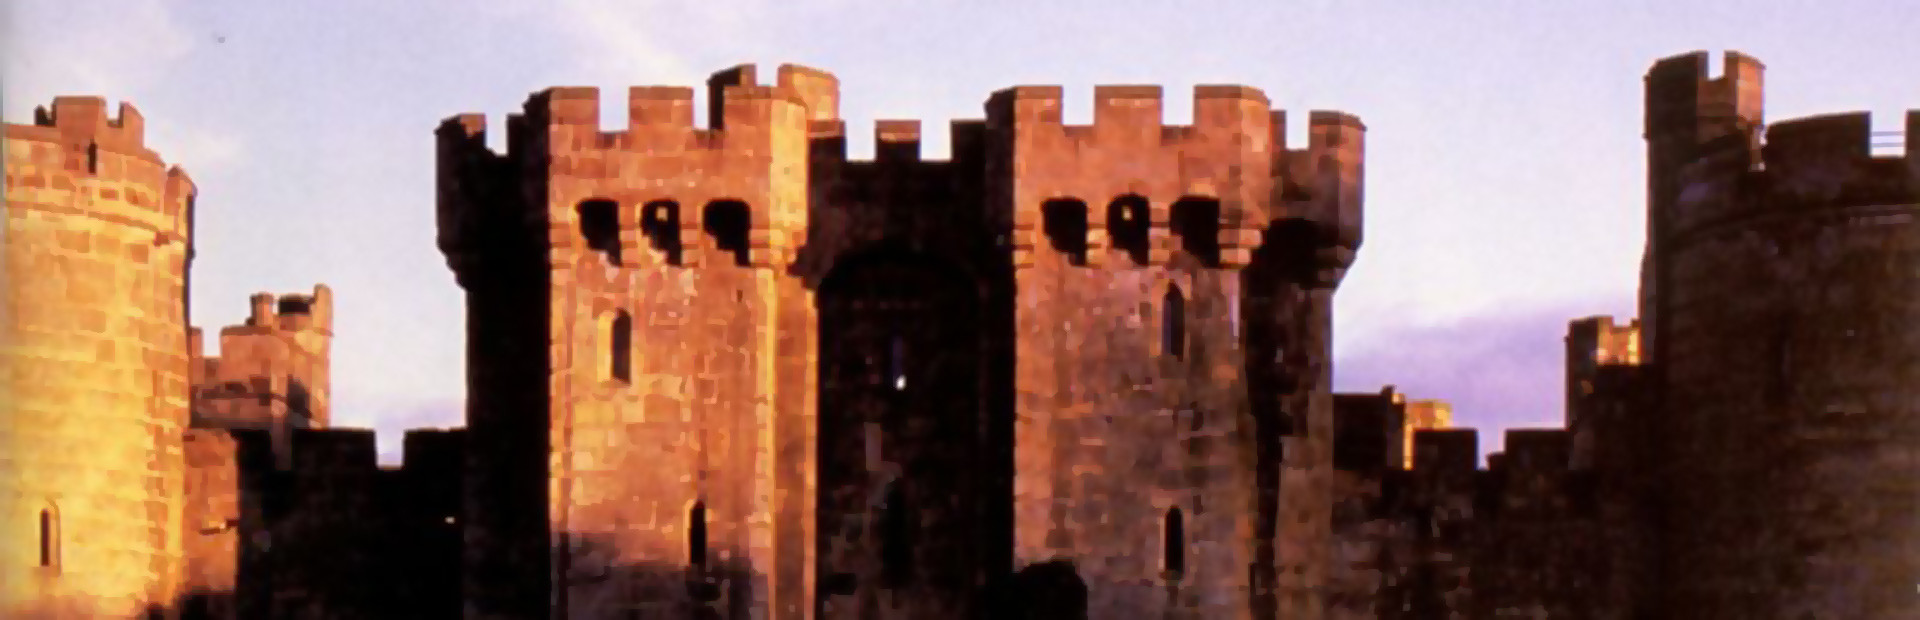 Castles cover image